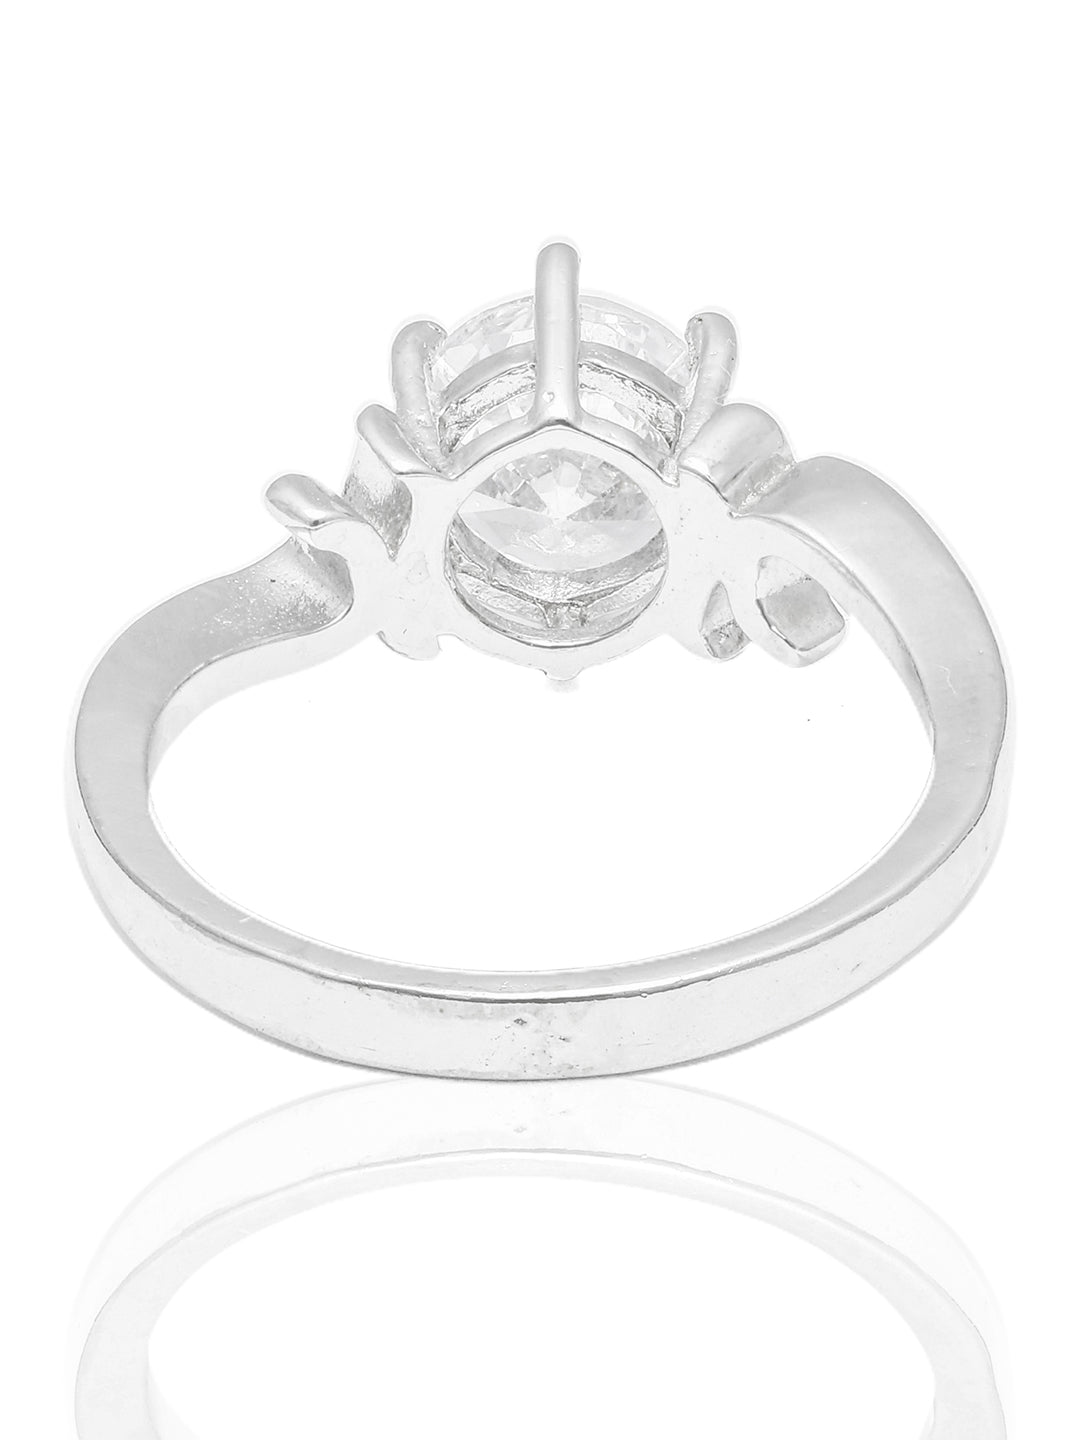 Sparkle & Swirl Solitaire Sterling Silver Ring